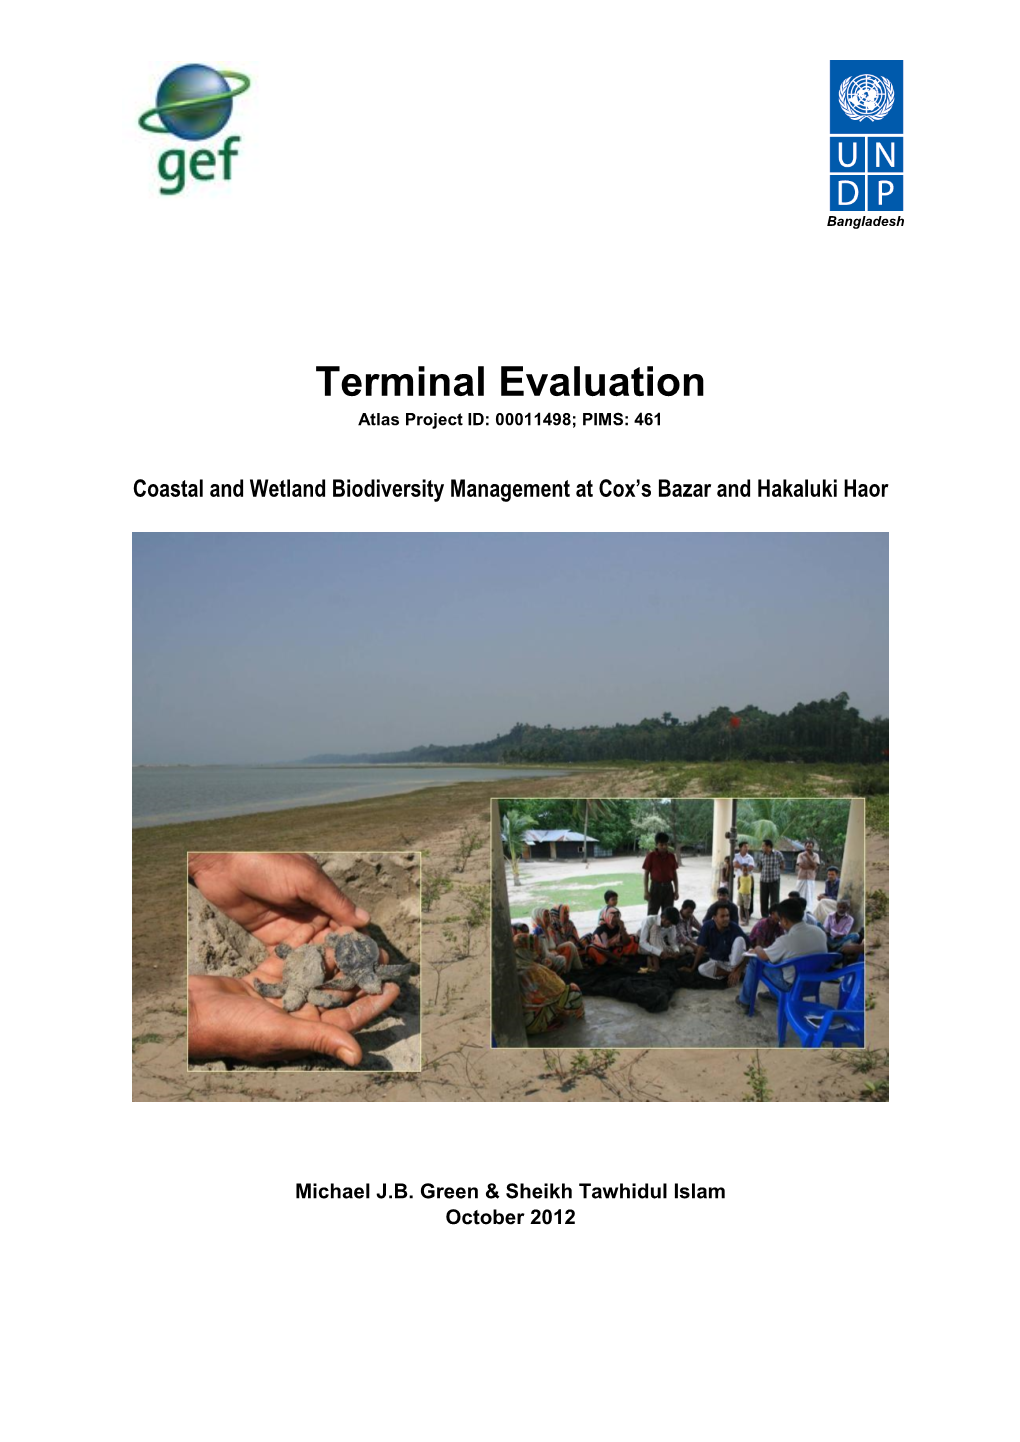 GEF Terminal Evaluation Report On